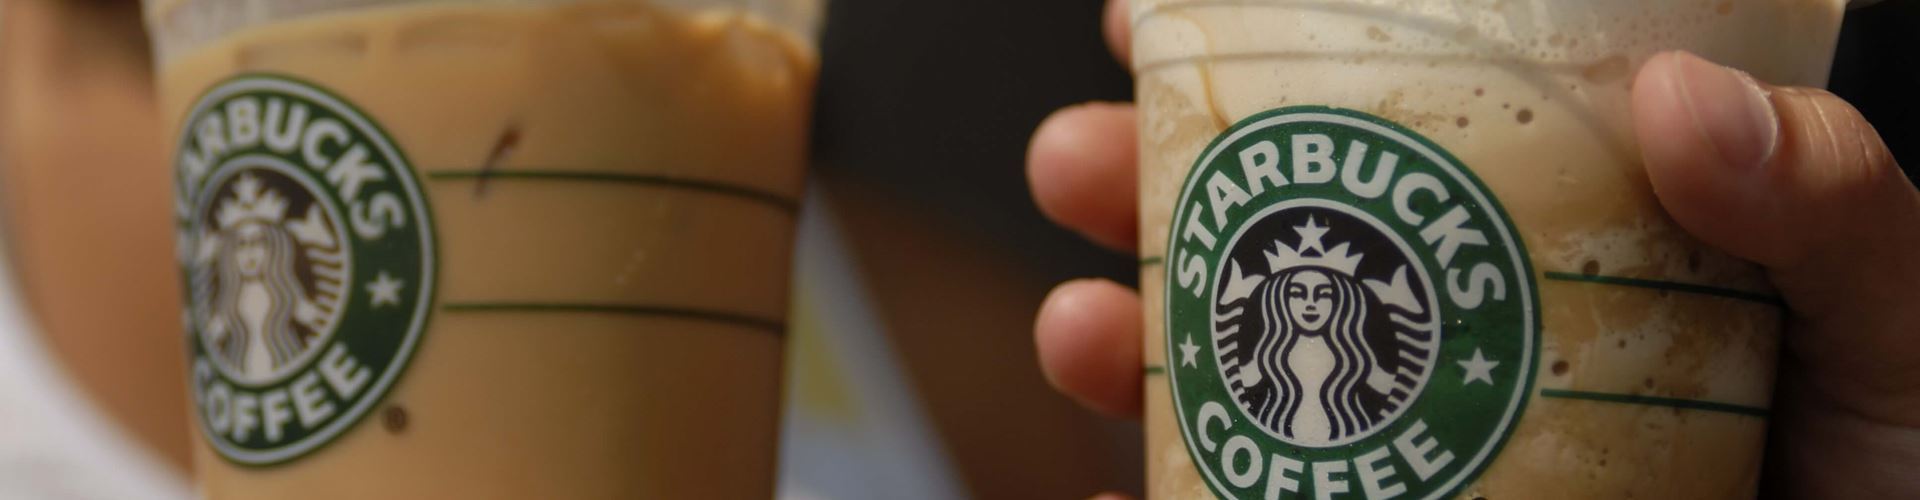 HMRC gets £8.1m in UK corporation tax from Starbucks